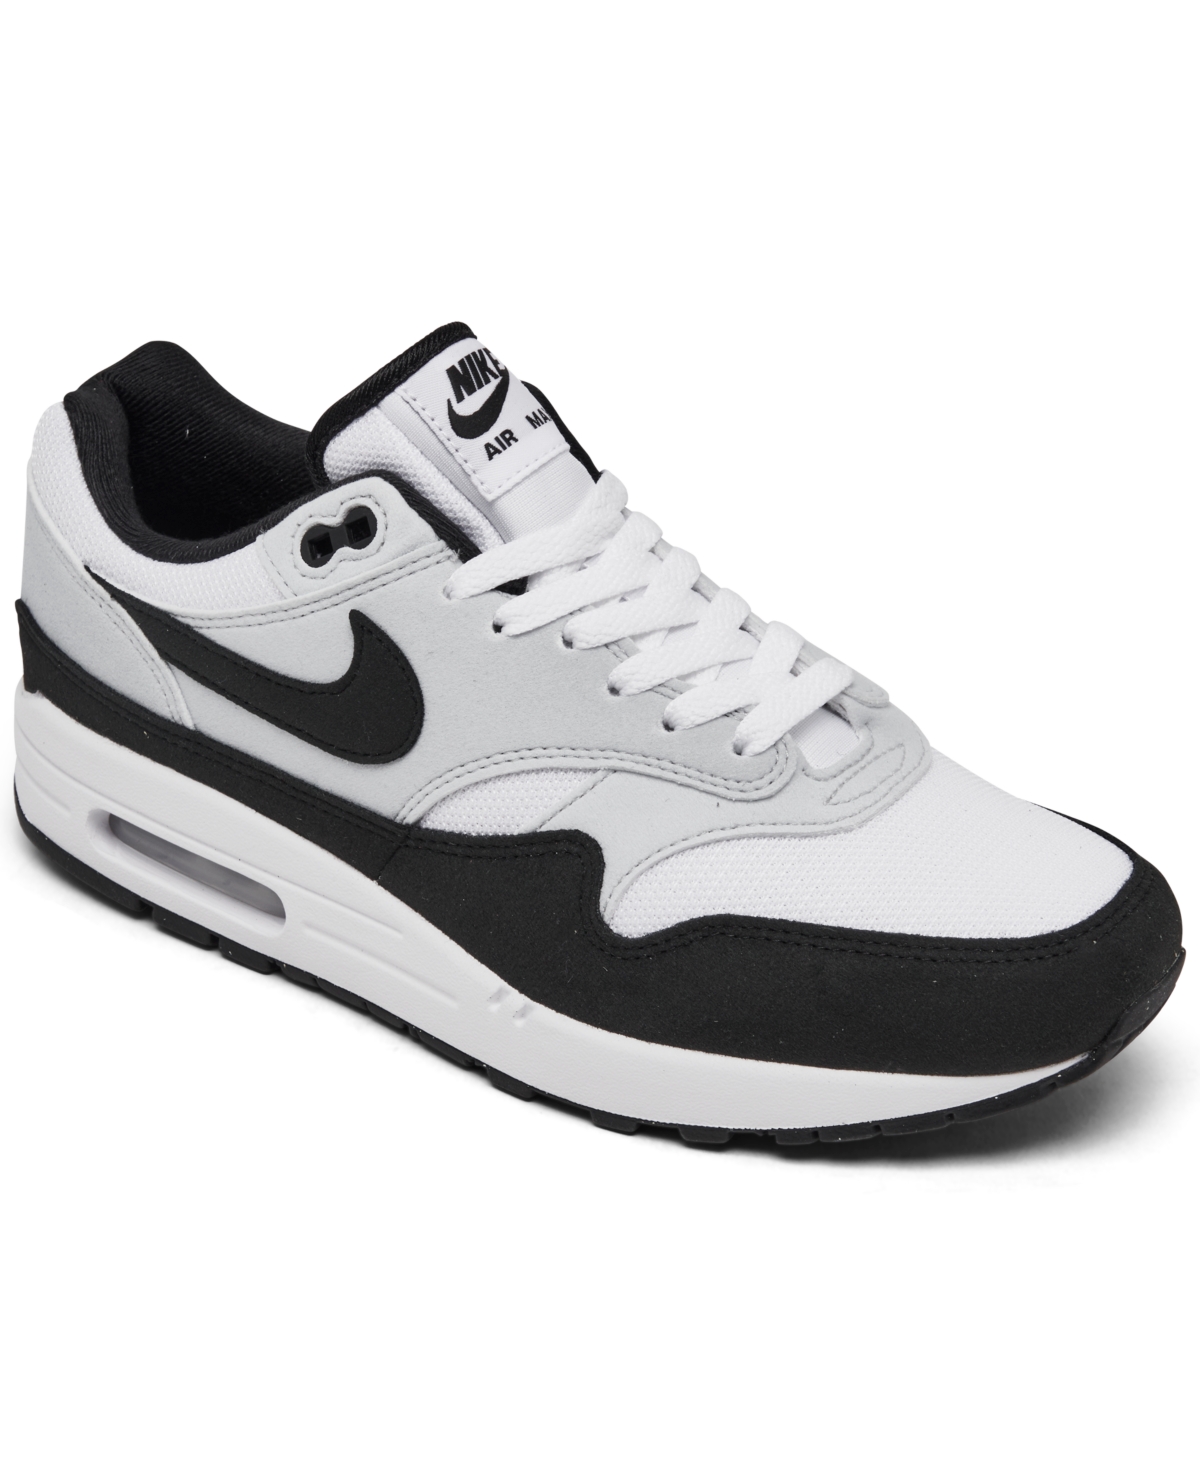 Men's Air Max 1 Casual Sneakers from Finish Line - White, Black, Gray